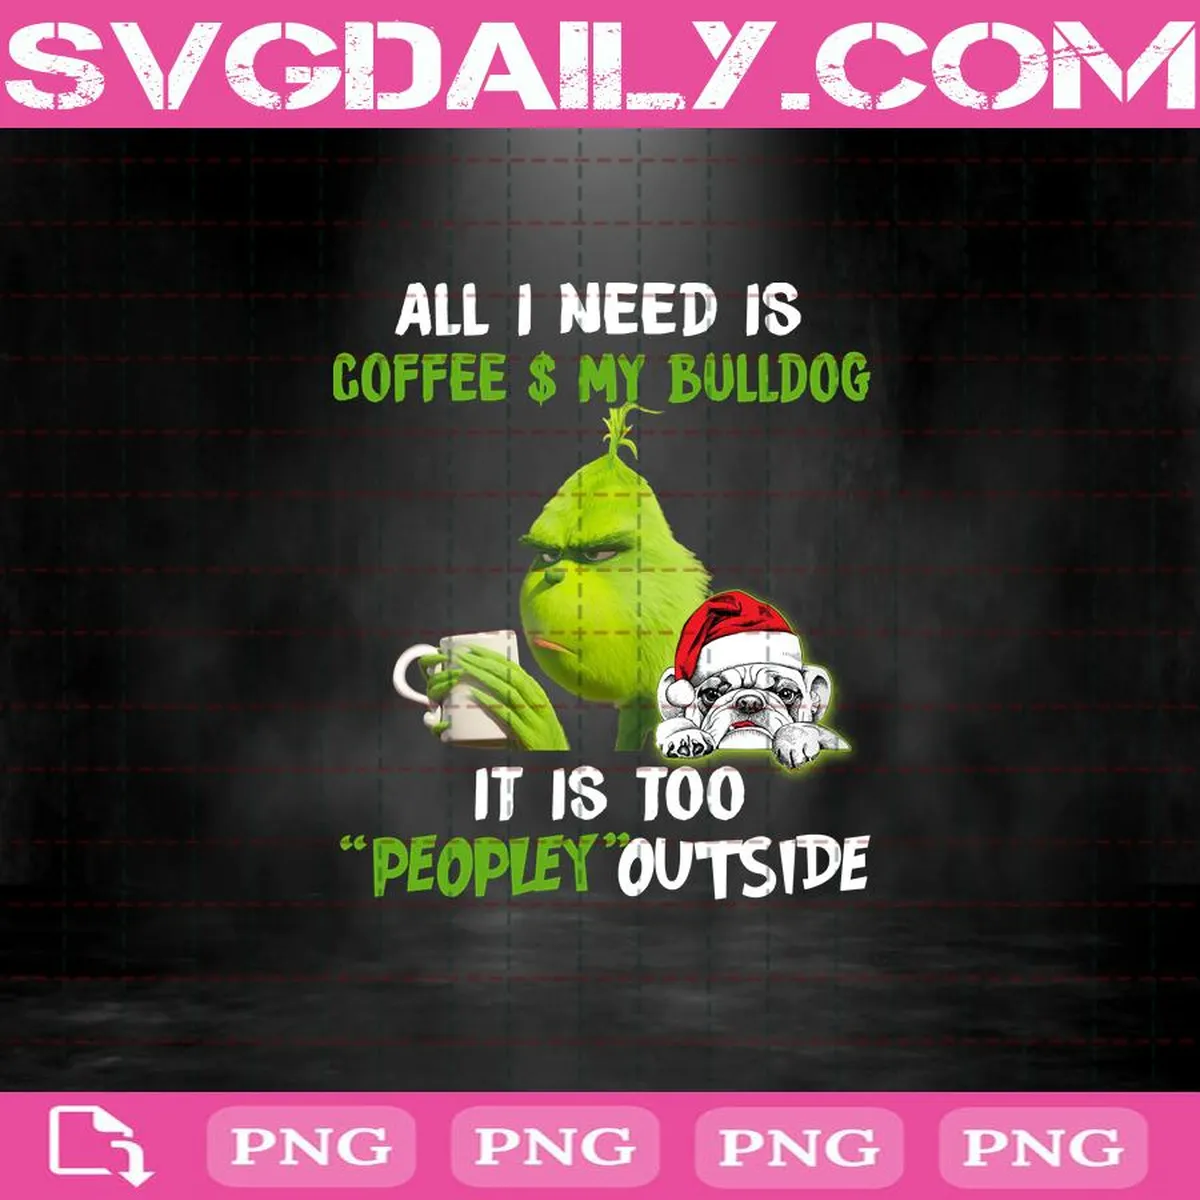 All I Need Is Coffee And Bulldog It Is Too Peopley Outside Png, Christmas Tree Png, Merry Christmas Png, Snow Blessed Png